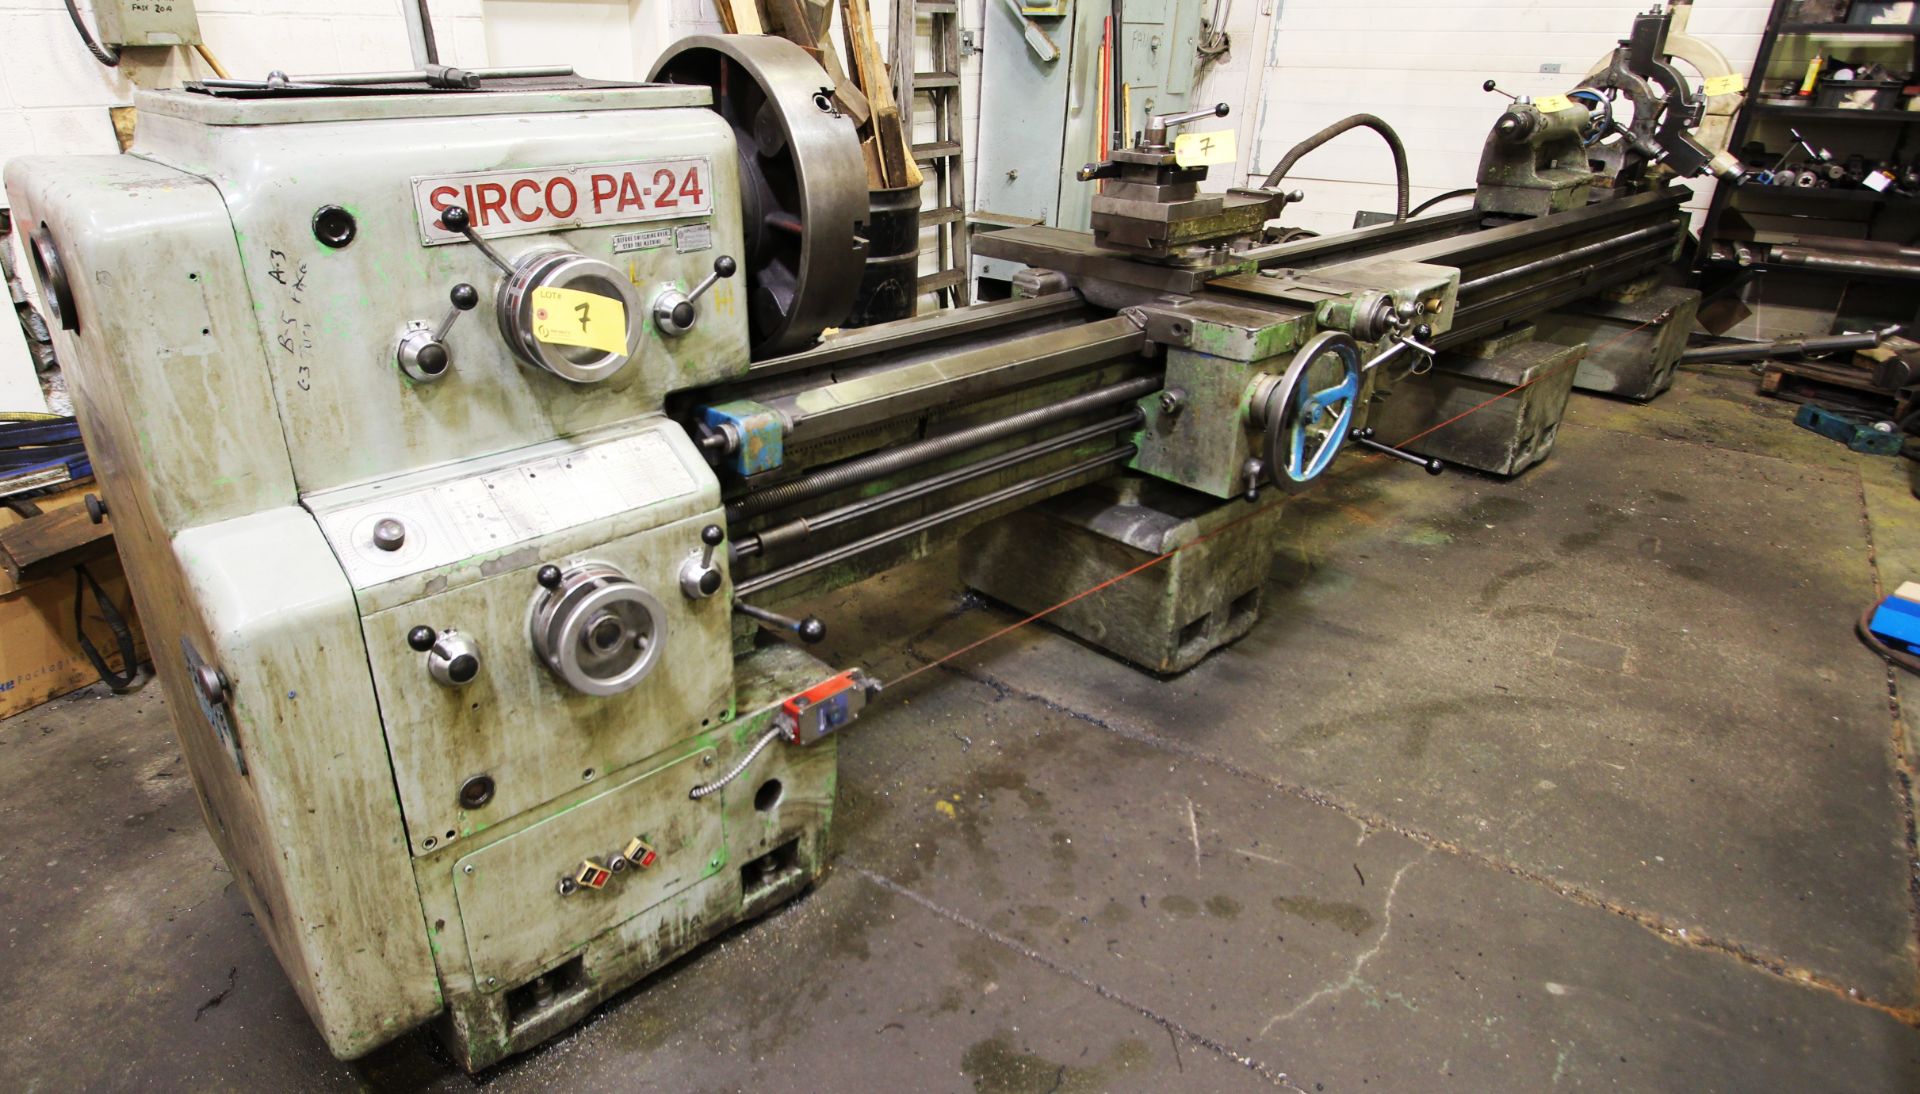 SIRCO PA-24 Engine Lathe, 24” x 144”, 3.5” Spindle Bore, Tailstock, (3) Steady Rests, 4-Jaw Chuck,